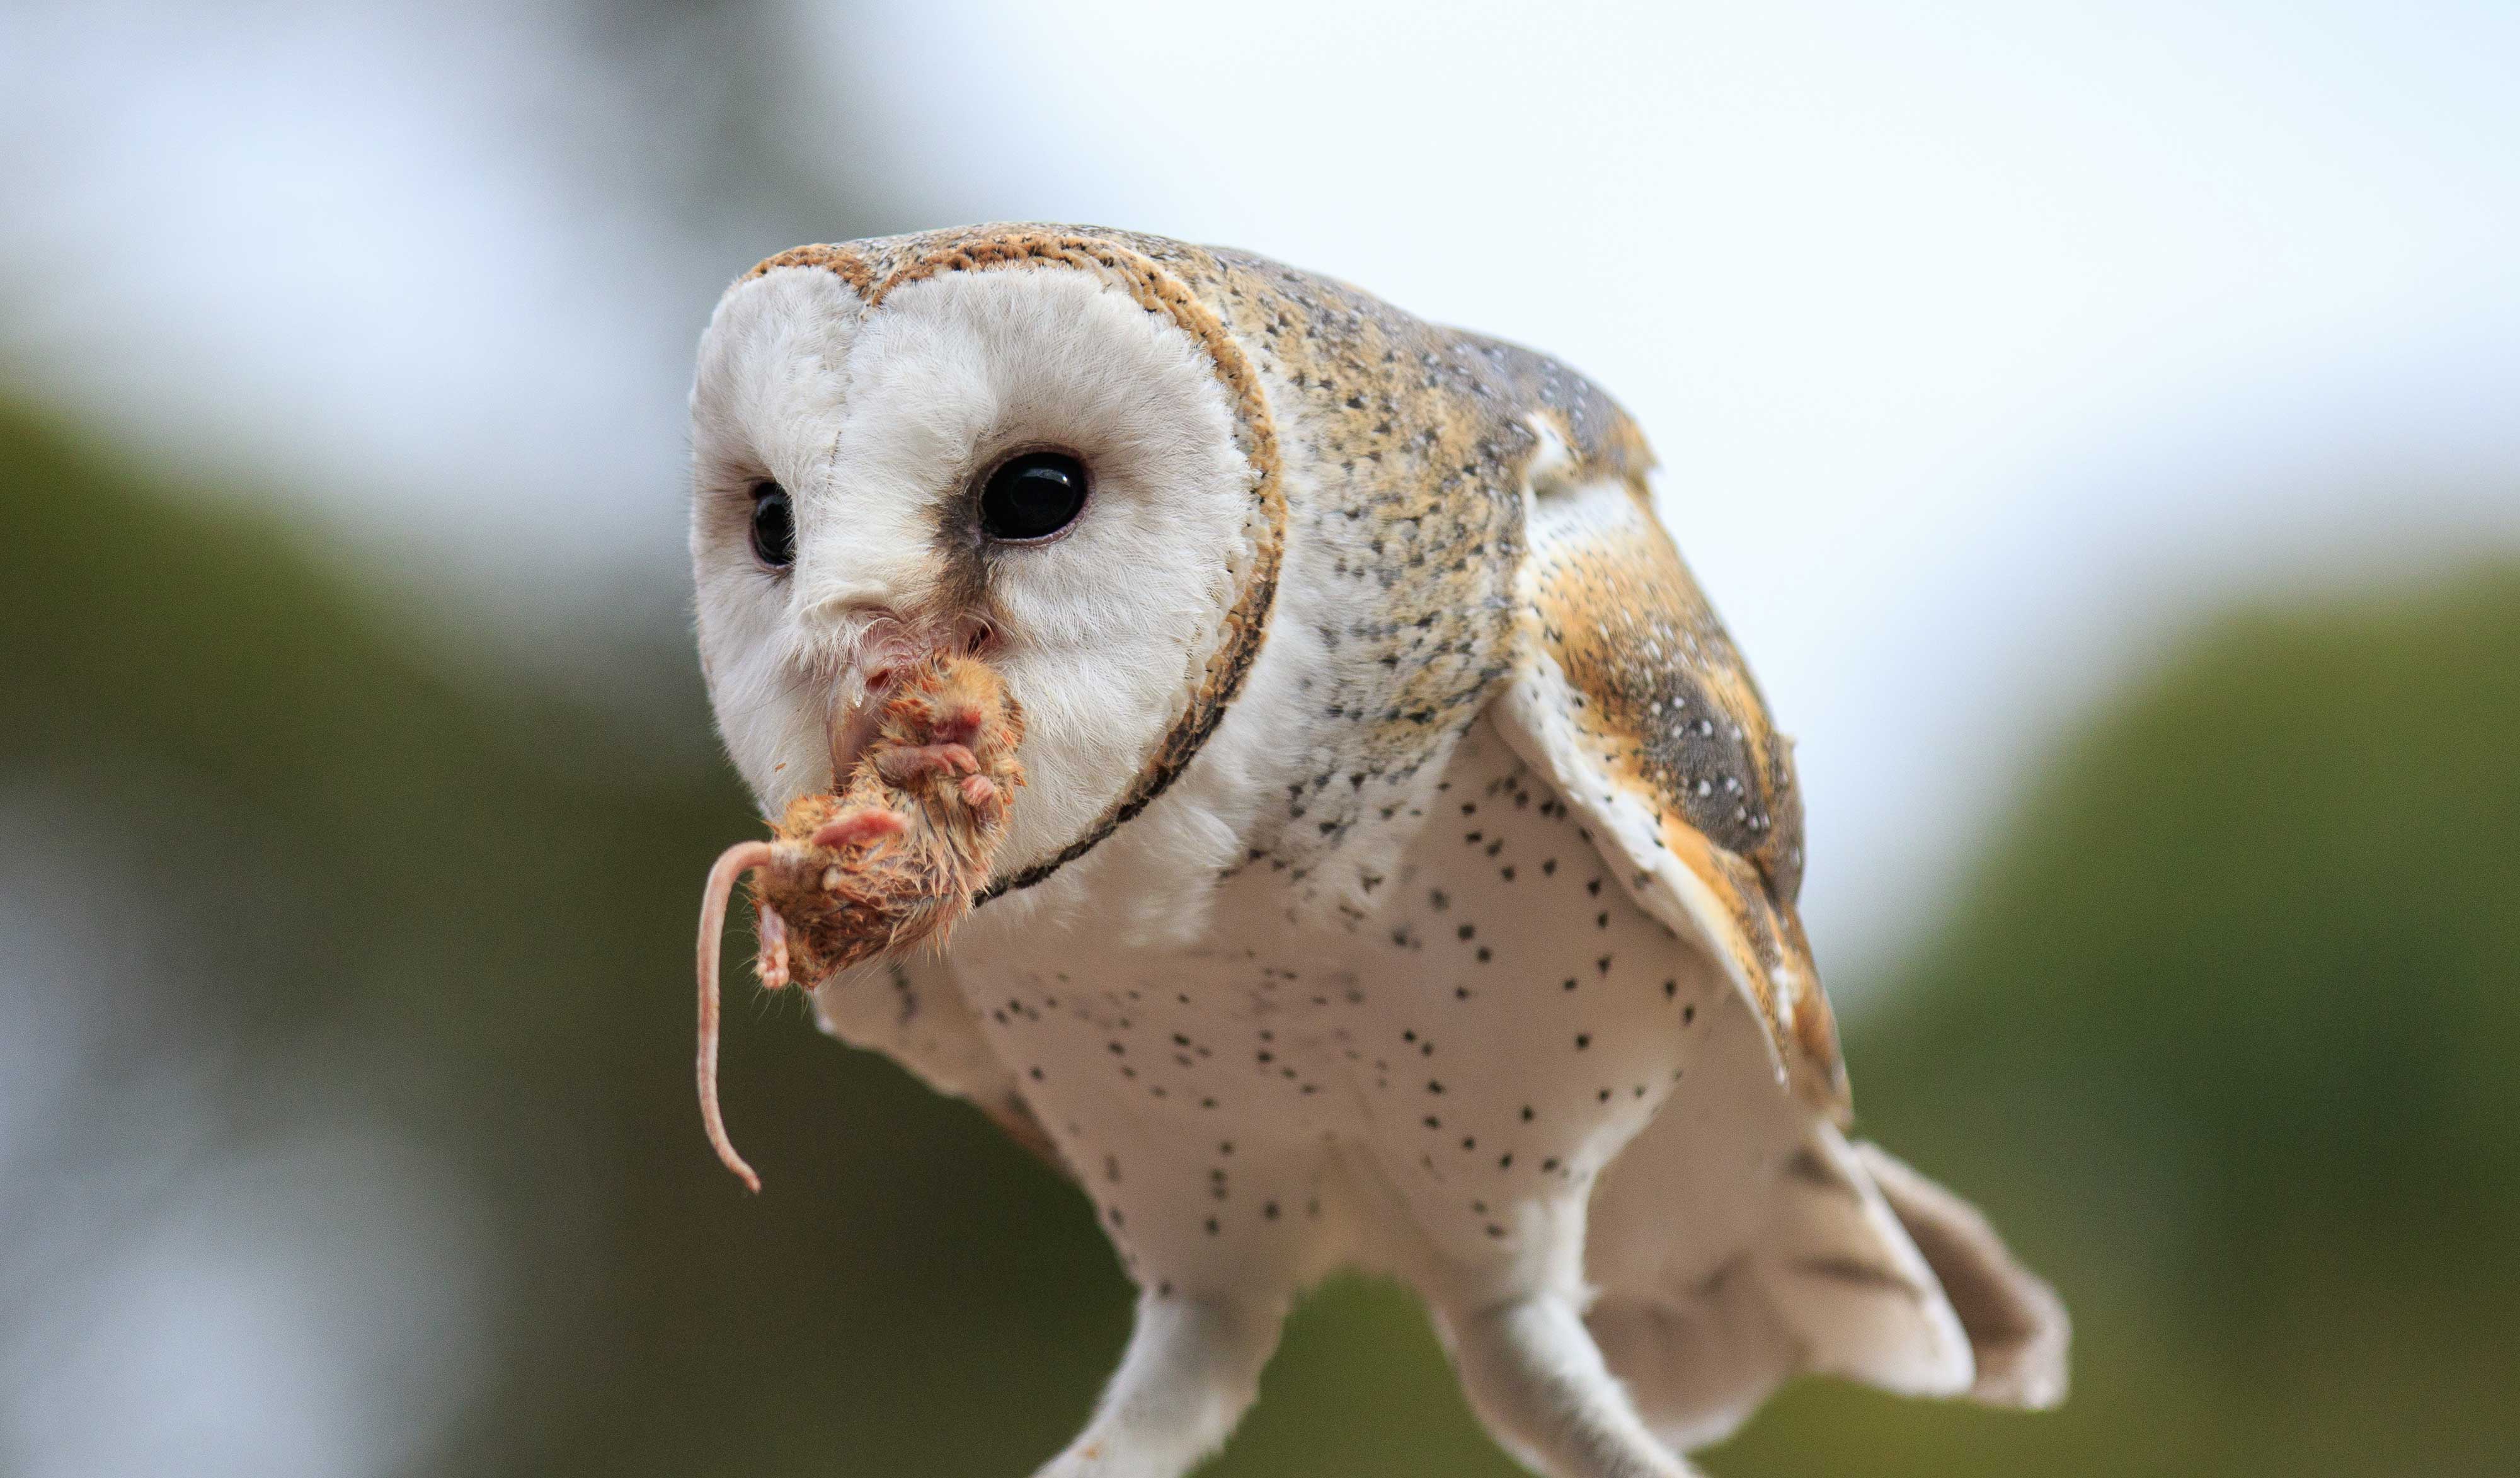 Barn owl eating a rodent